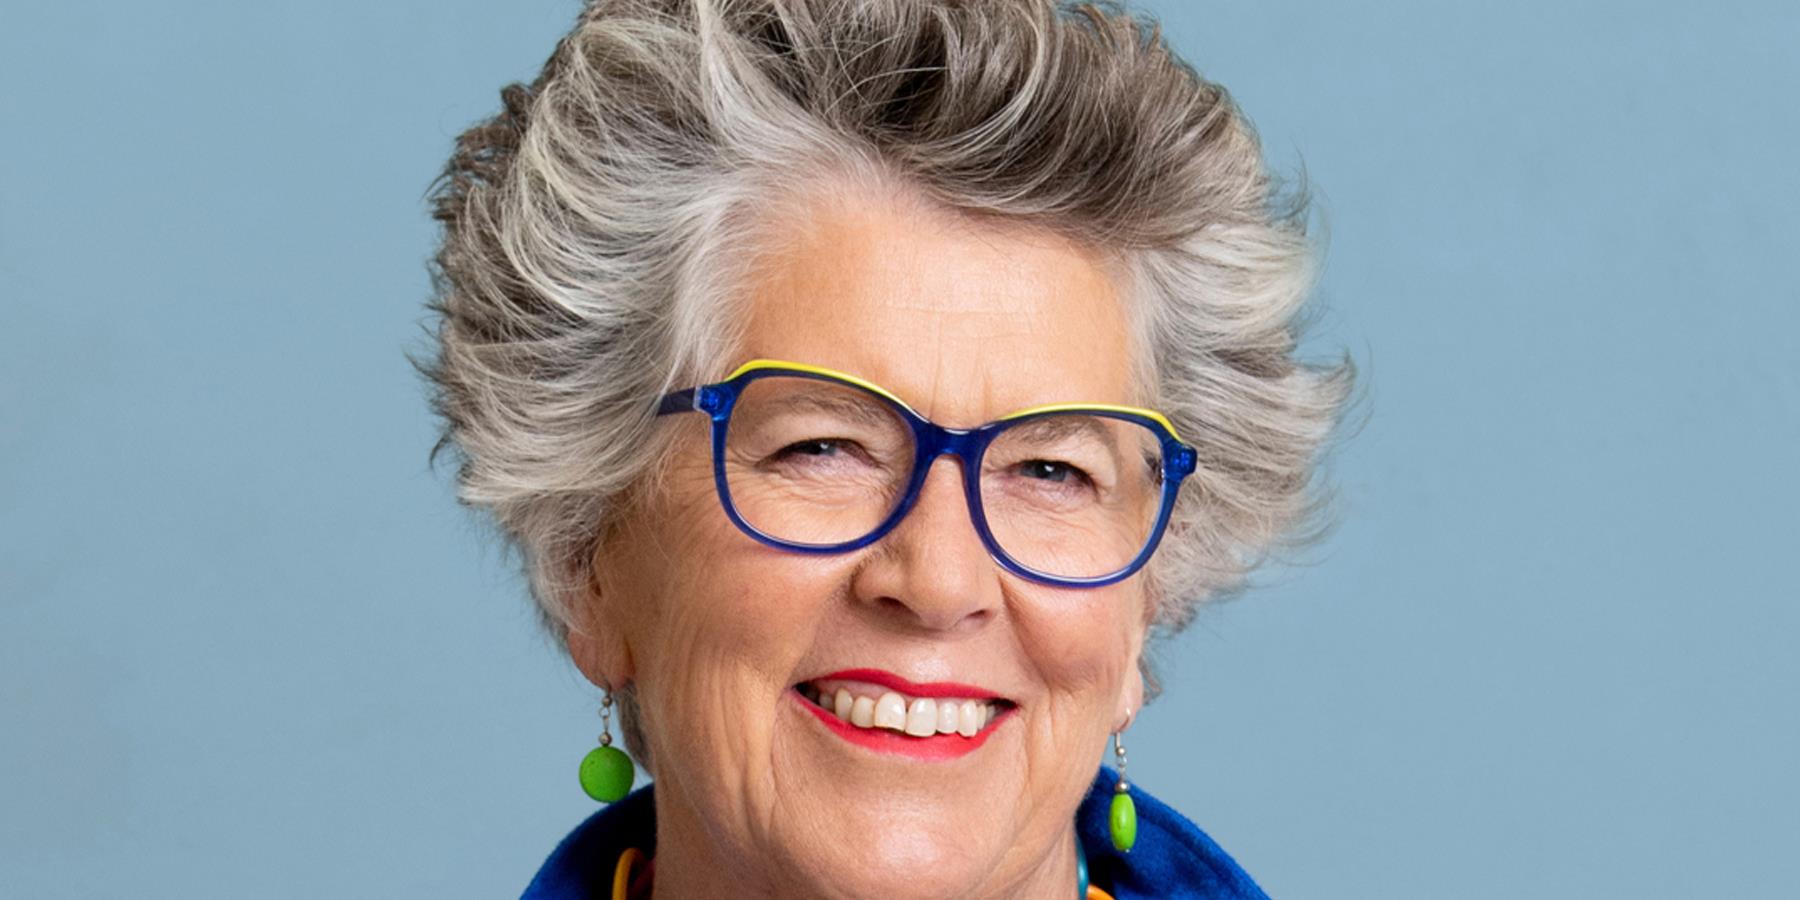 A lady with bright blue glasses